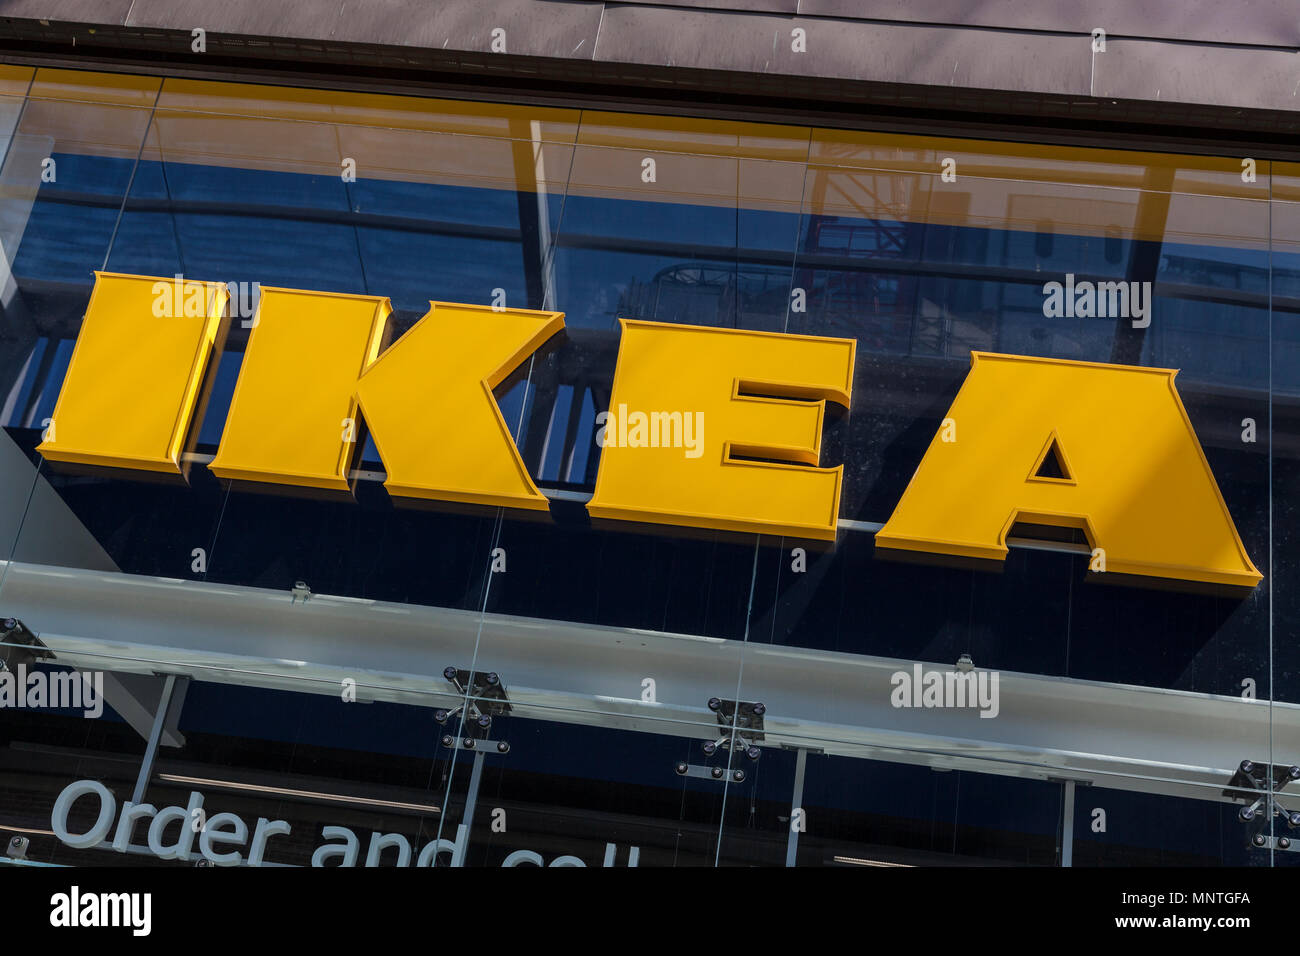 Ikea store at Westfield shopping centre in Stratford, London Stock Photo